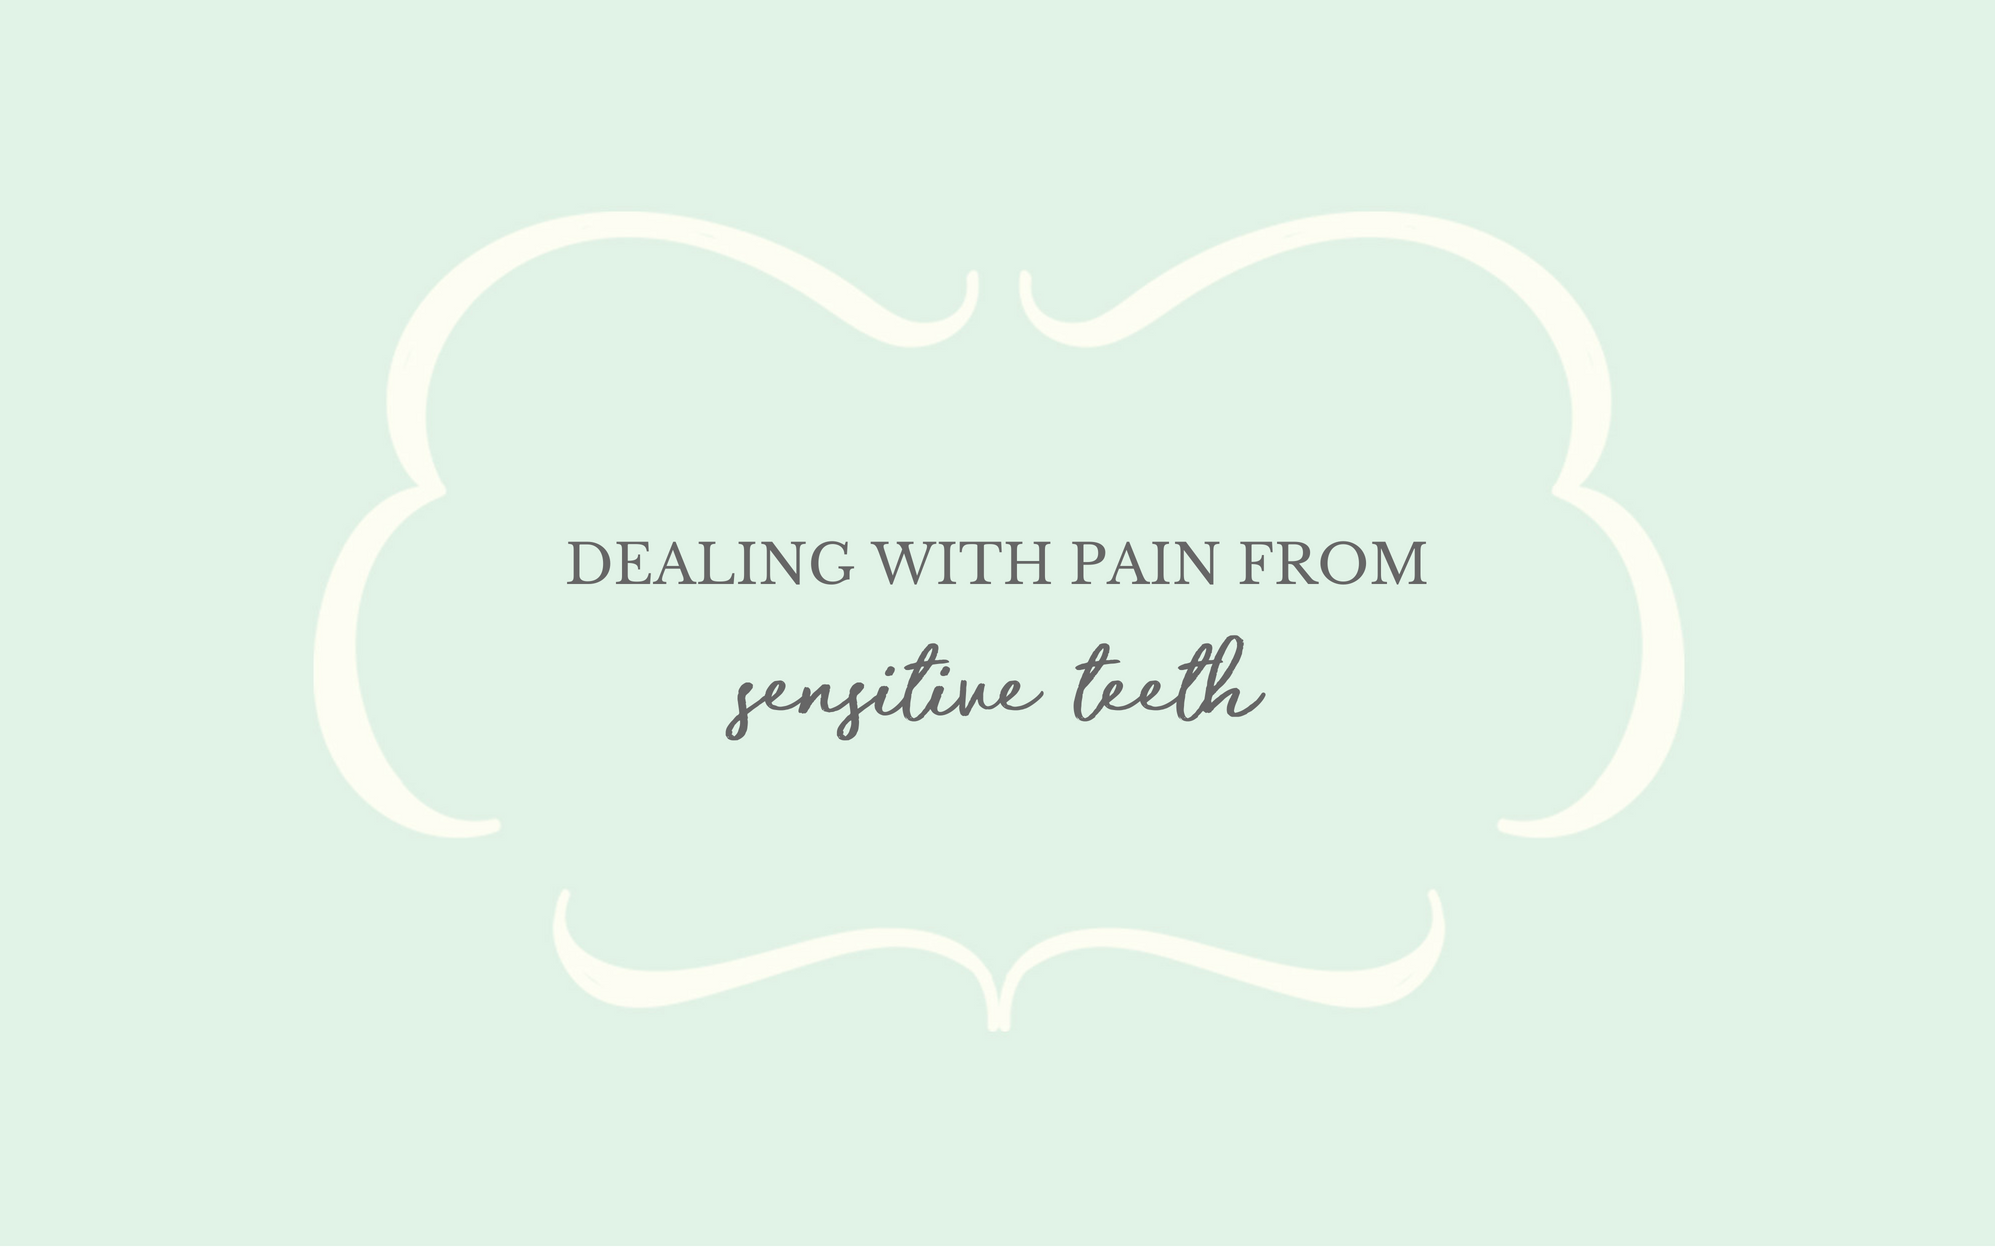 Dealing With Pain from Sensitive Teeth